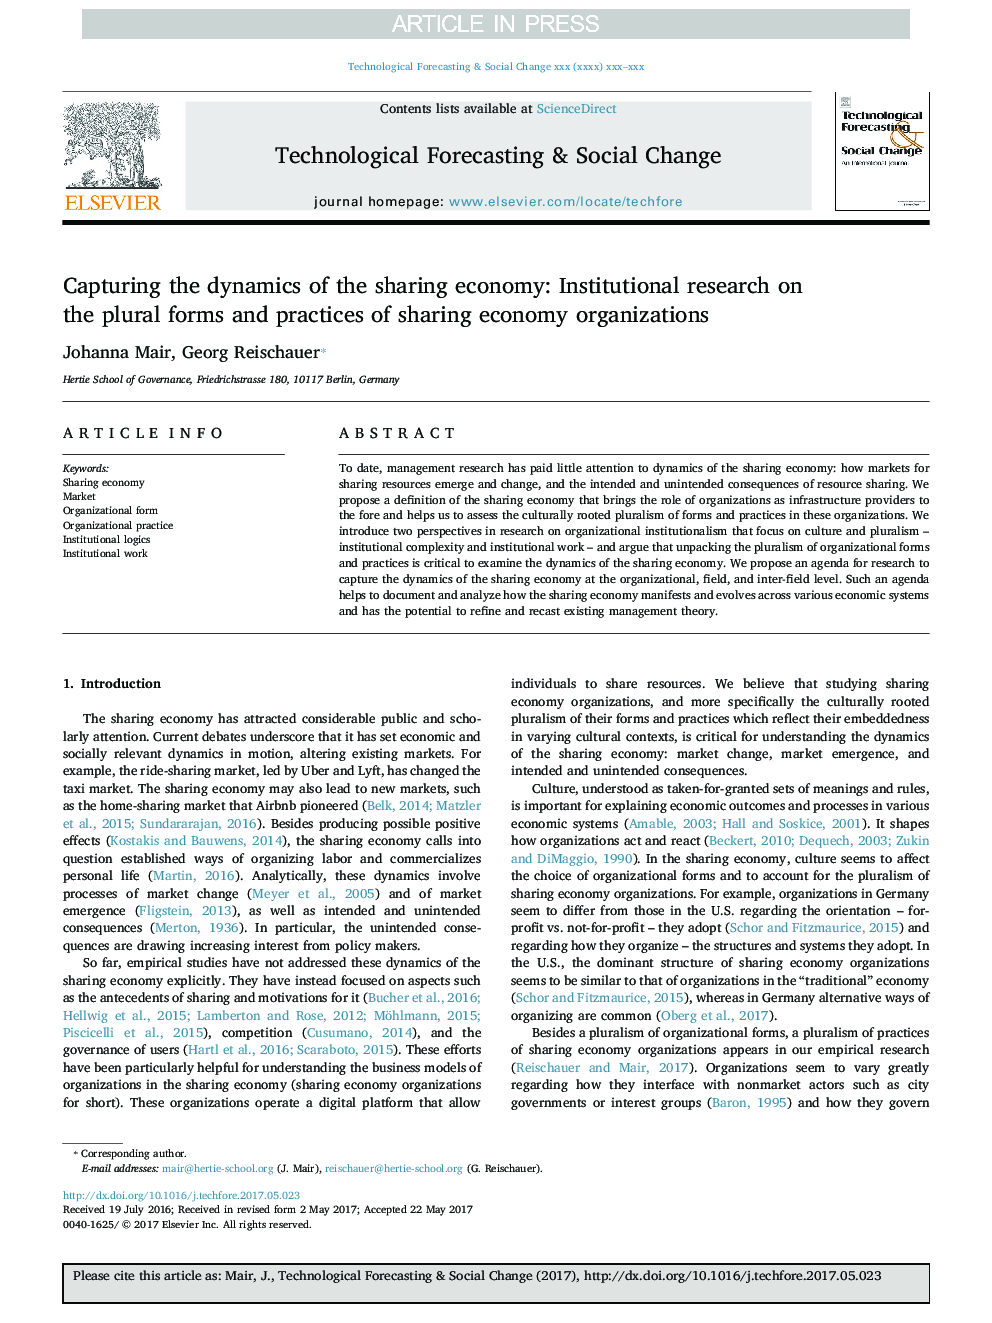 Capturing the dynamics of the sharing economy: Institutional research on the plural forms and practices of sharing economy organizations